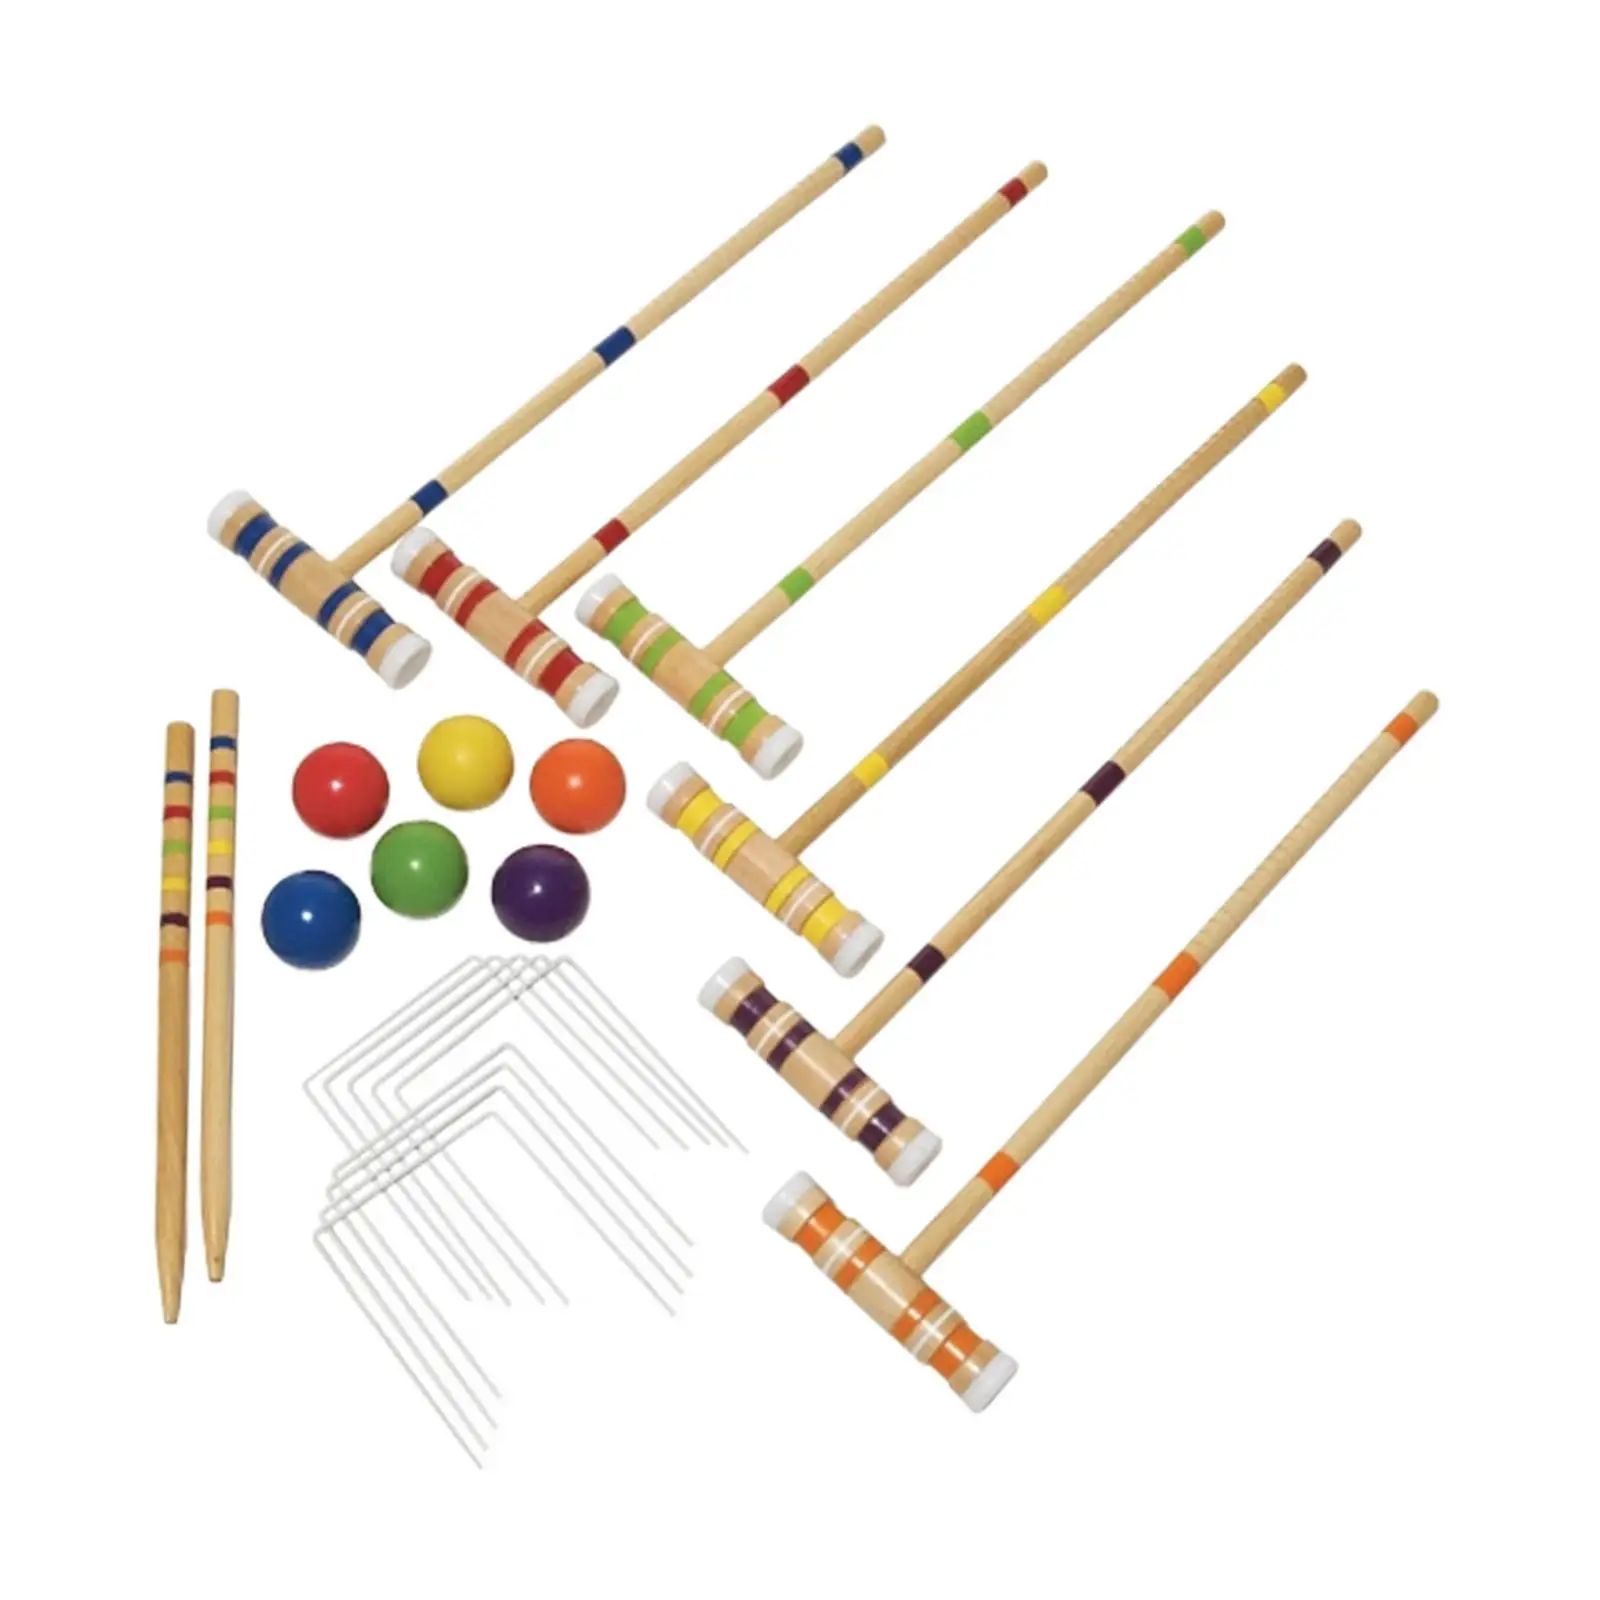 Sport Outdoor Croquet Set with Wooden Mallets Croquet Set for 6 Players for Outdoor Sport Games Backyard Teenager Adults Parties